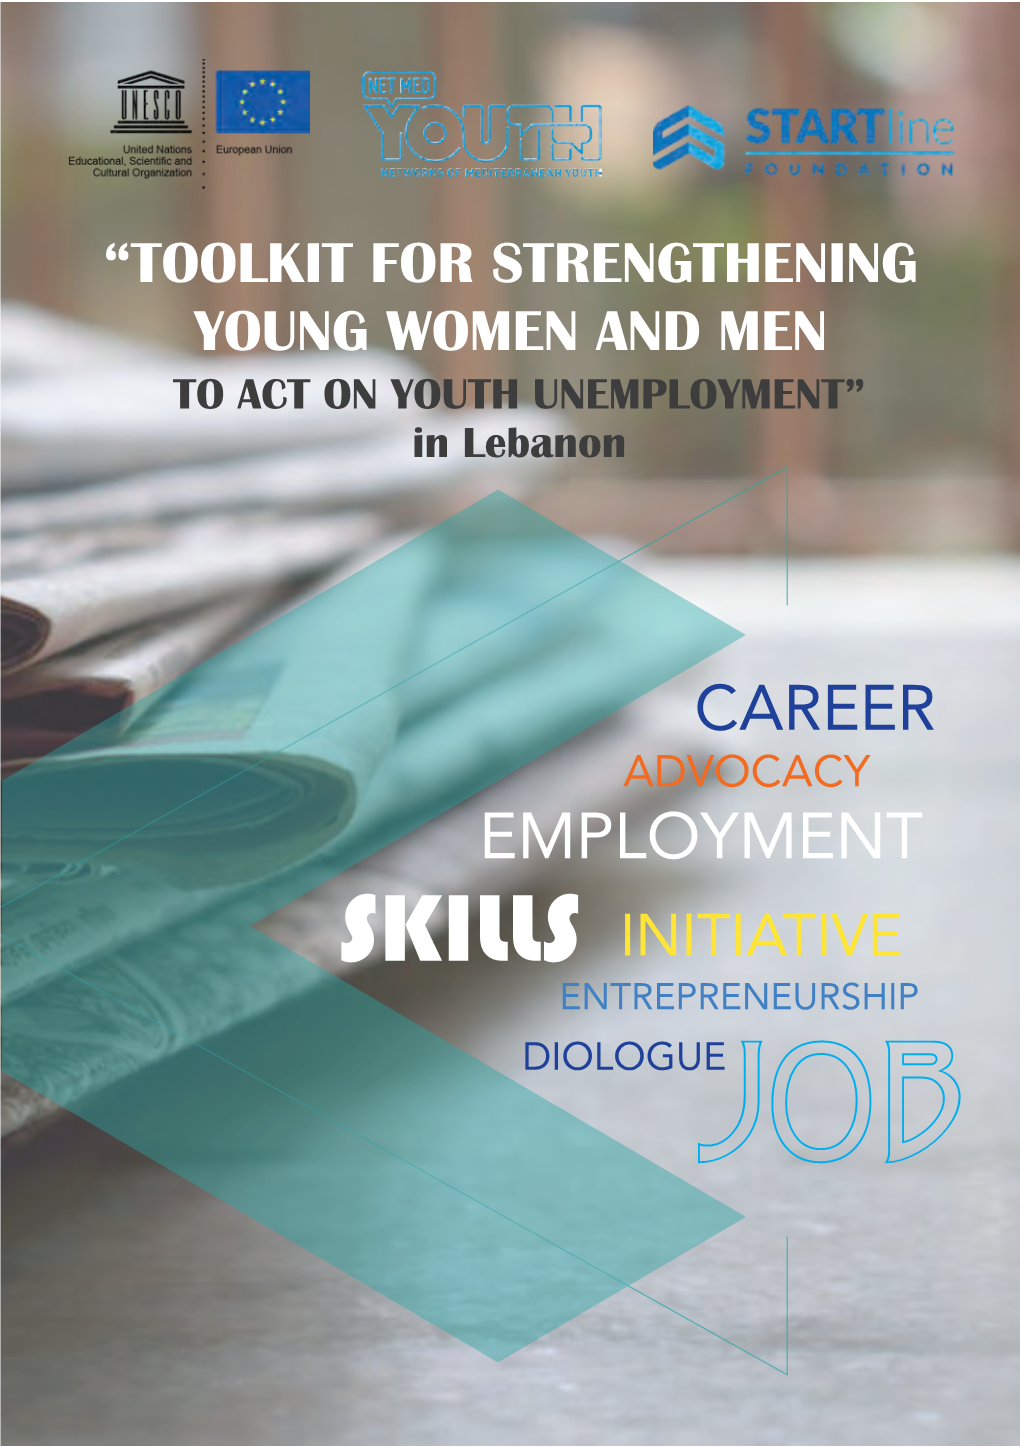 Toolkit for Strengthening the Youth in Lebanon to Act on Unemployment